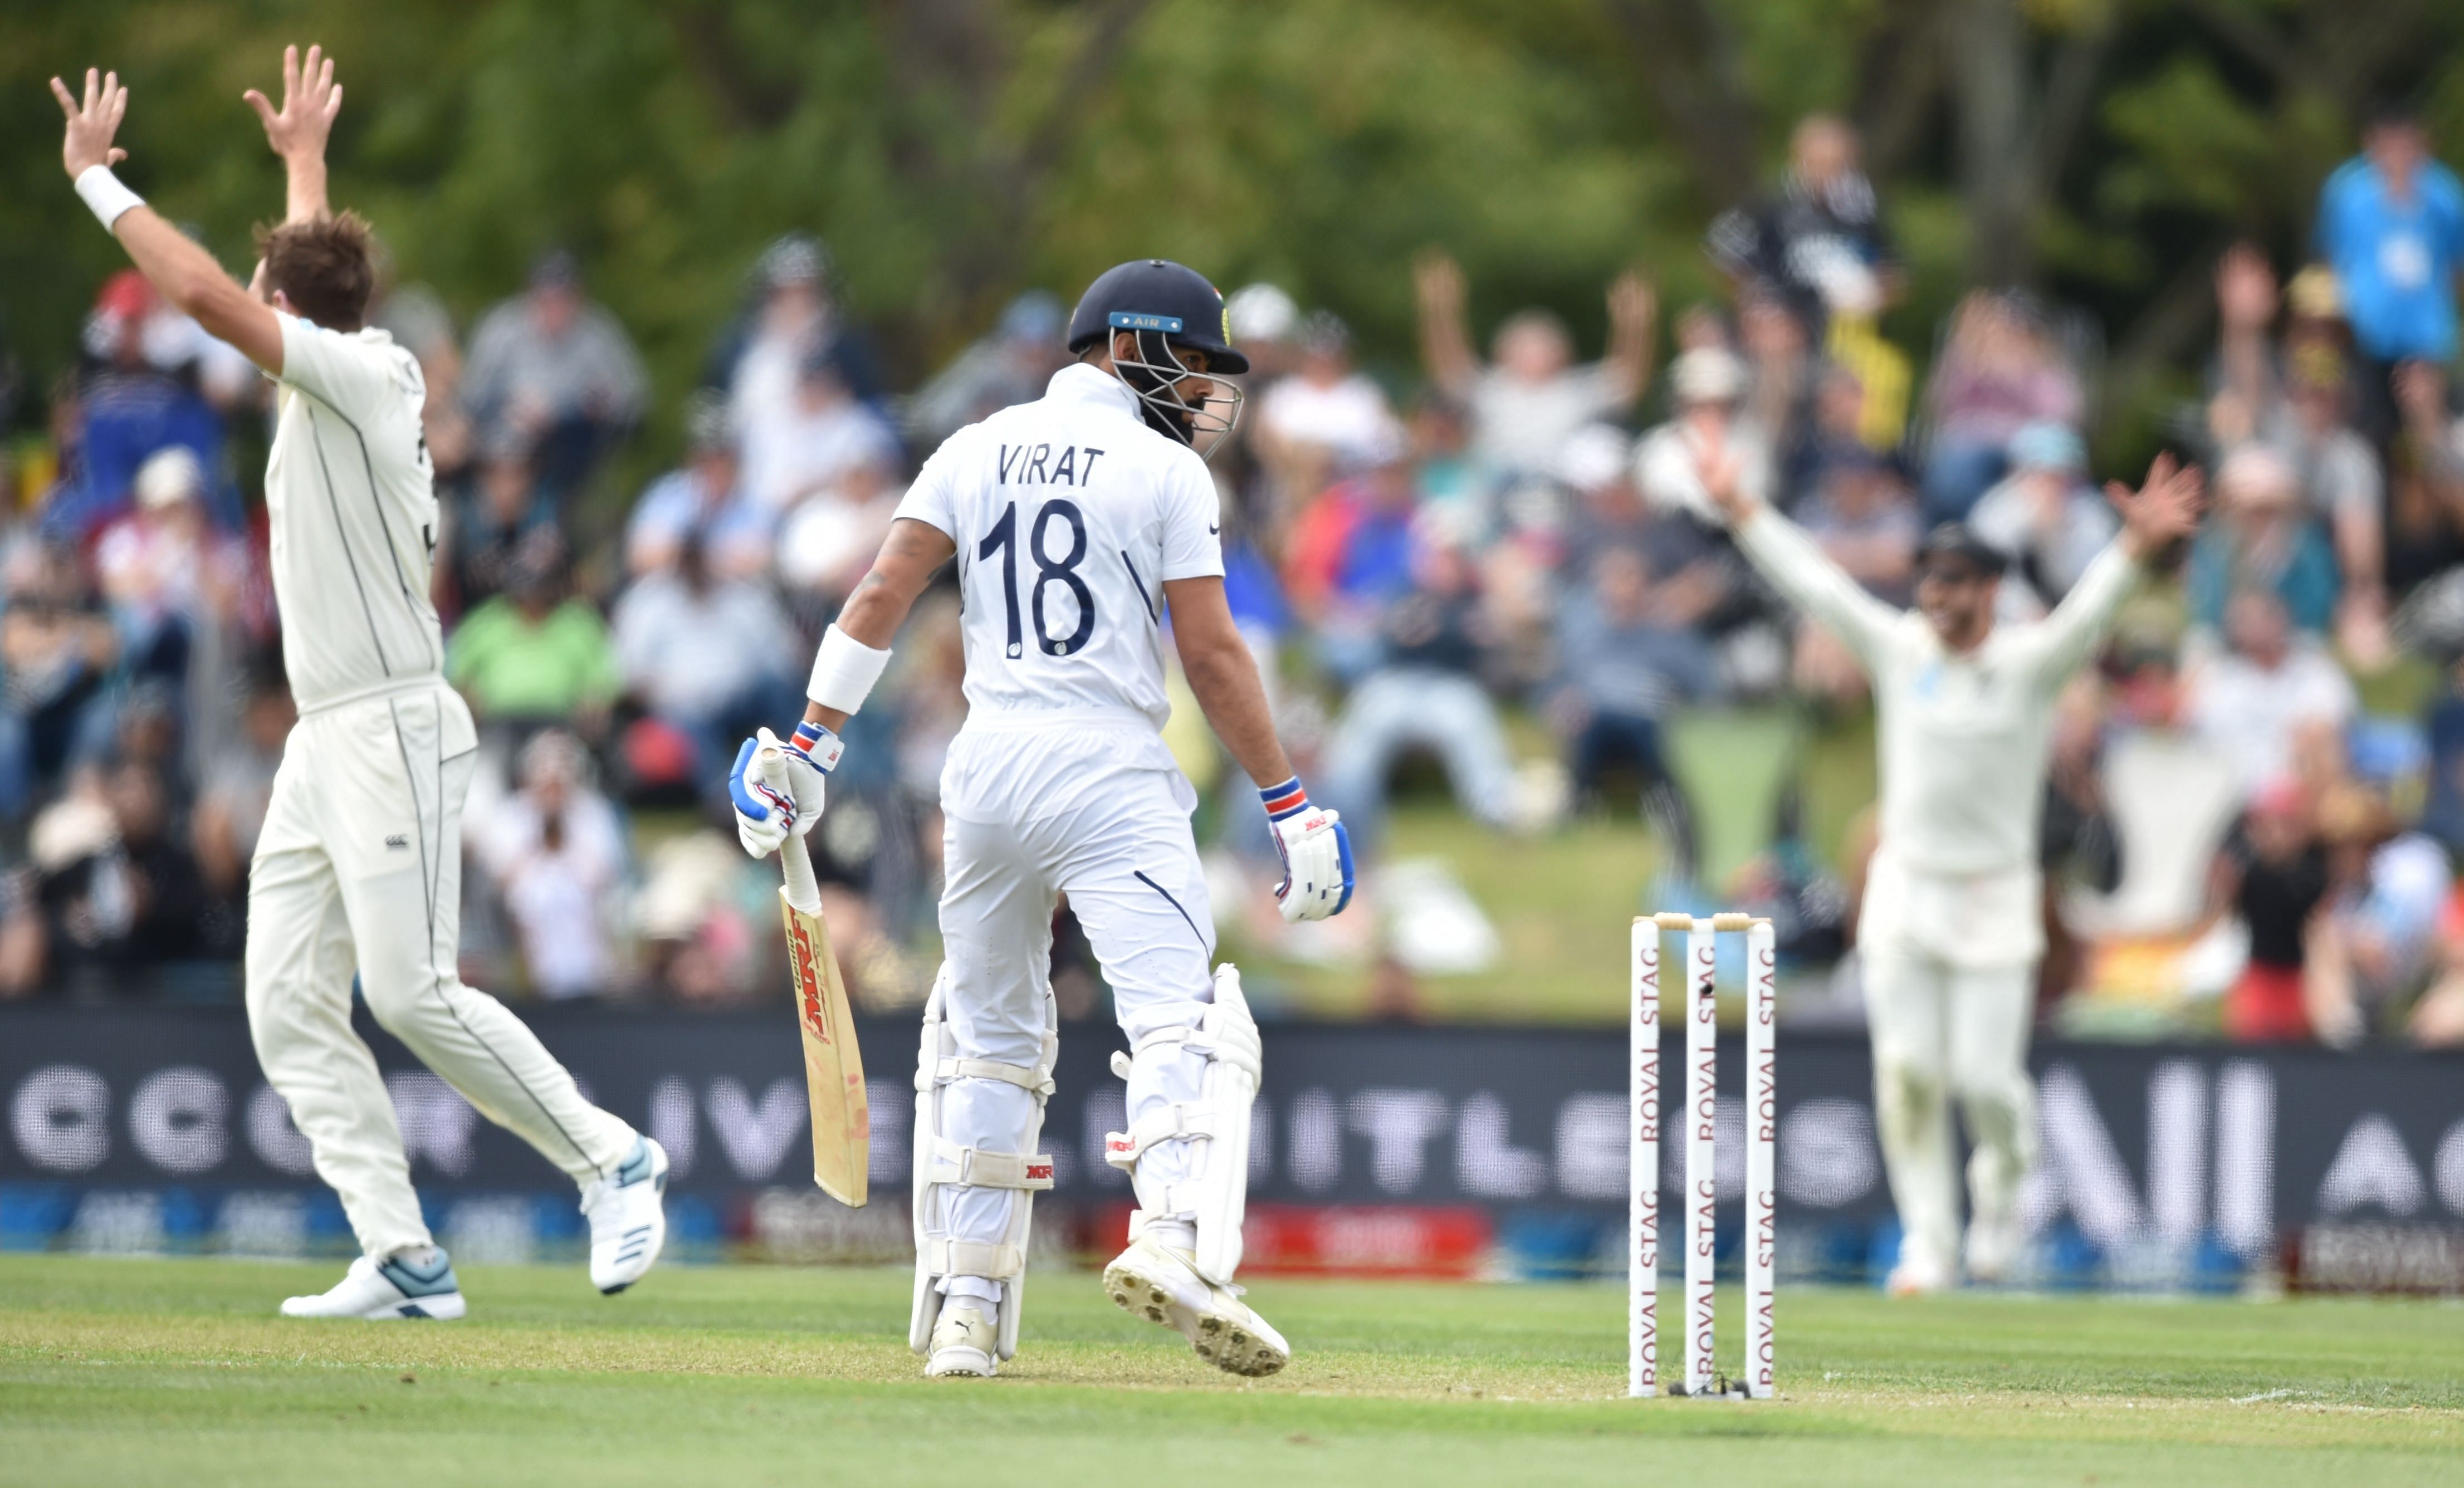 India's captain Virat Kohli (C) is bowled LBW by New Zealand's Tim Southee (L) on day one of the second Test cricket match between New Zealand and India at the Hagley Oval in Christchurch. (AFP Photo)